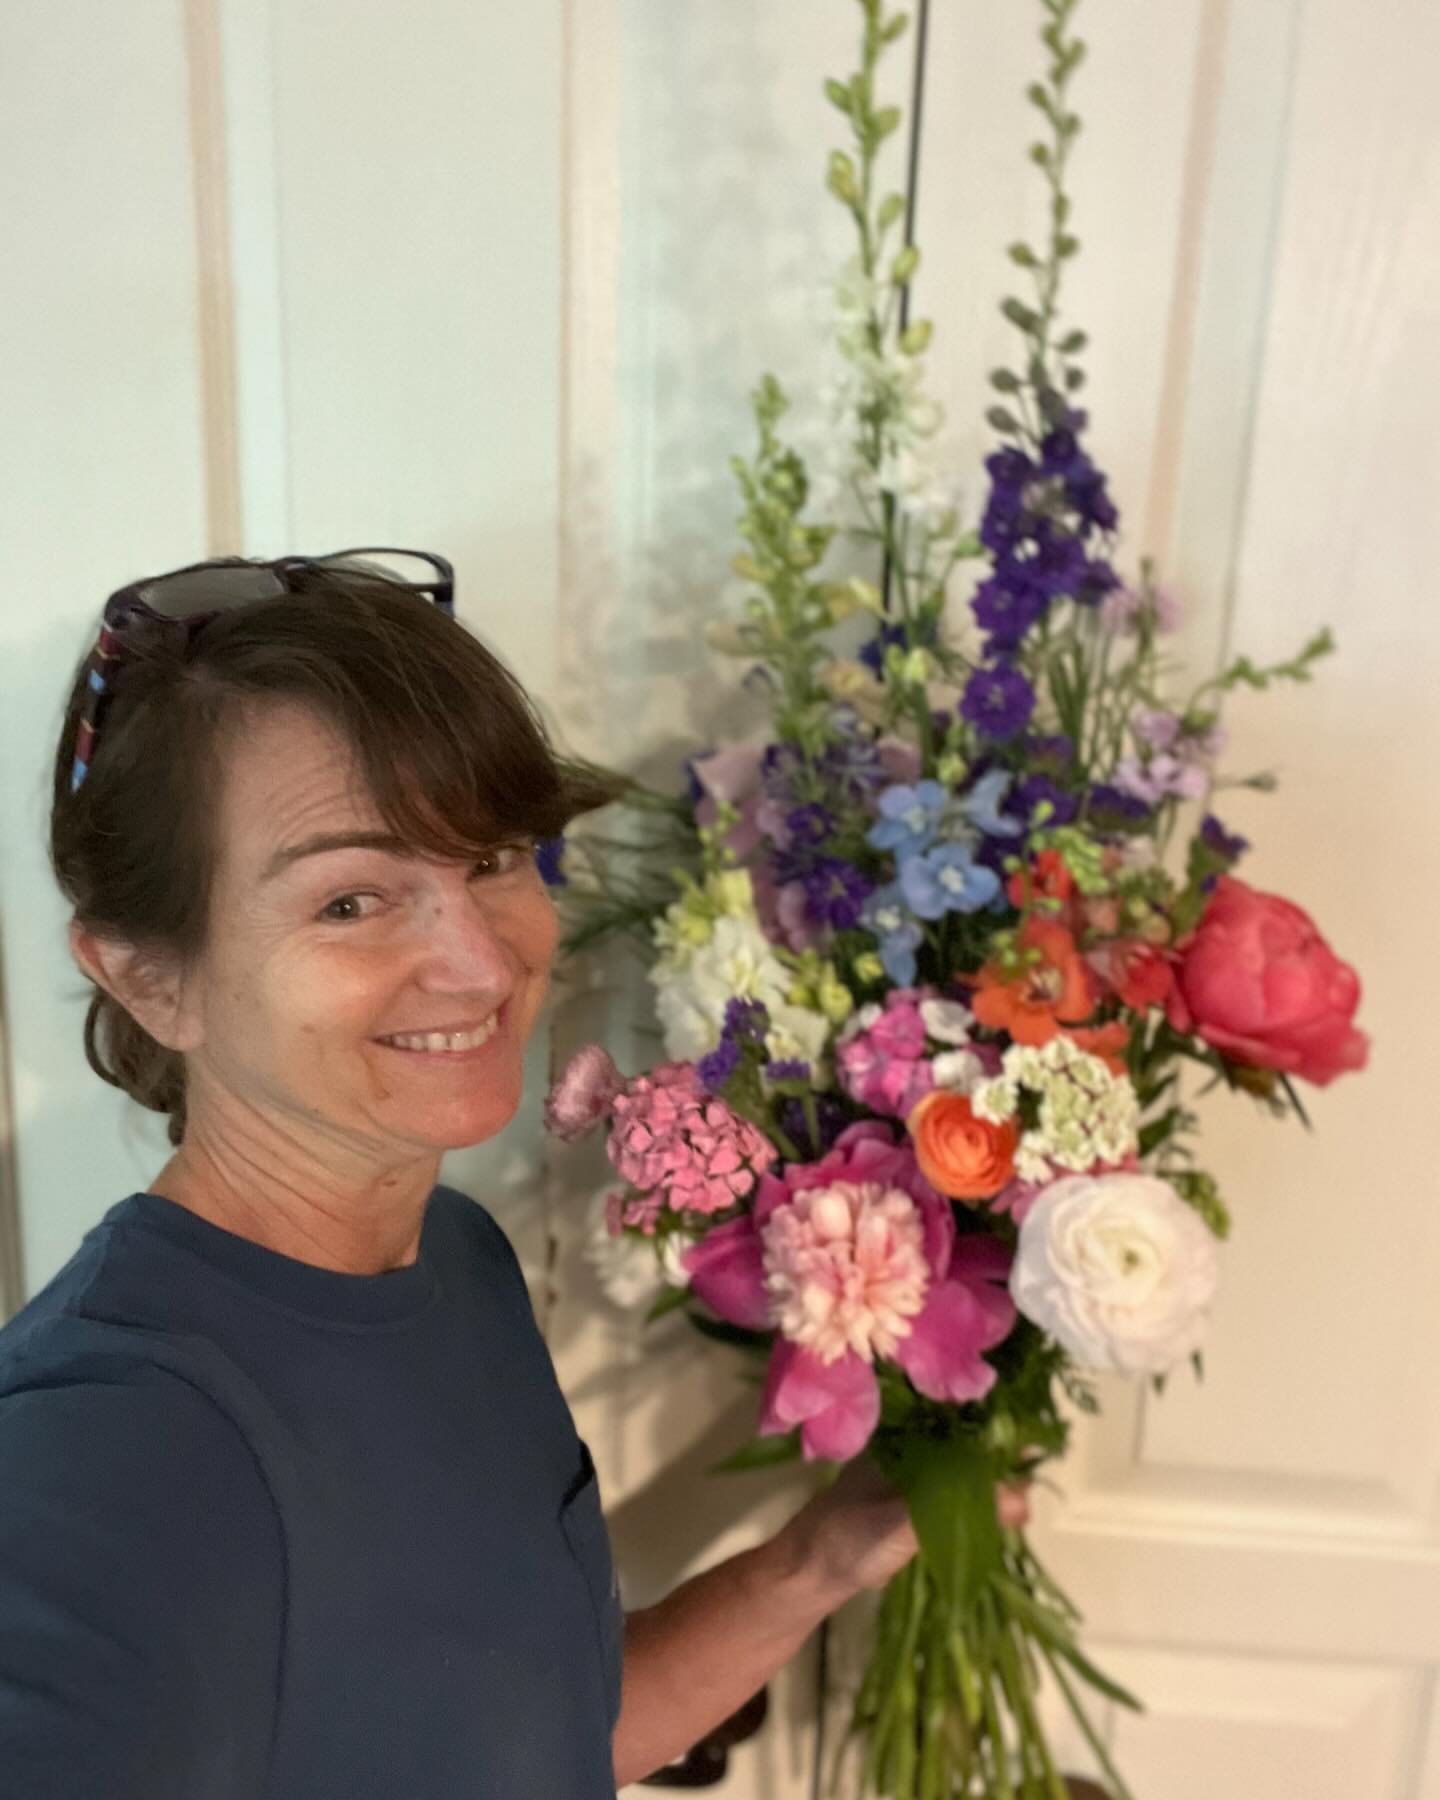 Bouquet subscribers: I just ruined you from ever buying grocery store flowers again. And I&rsquo;m not at all sorry. 😂

Better get the big vases out! Coming to you&hellip;

Thanks to @thebutchersmarkets Holly Springs for hosting our Wake County pick